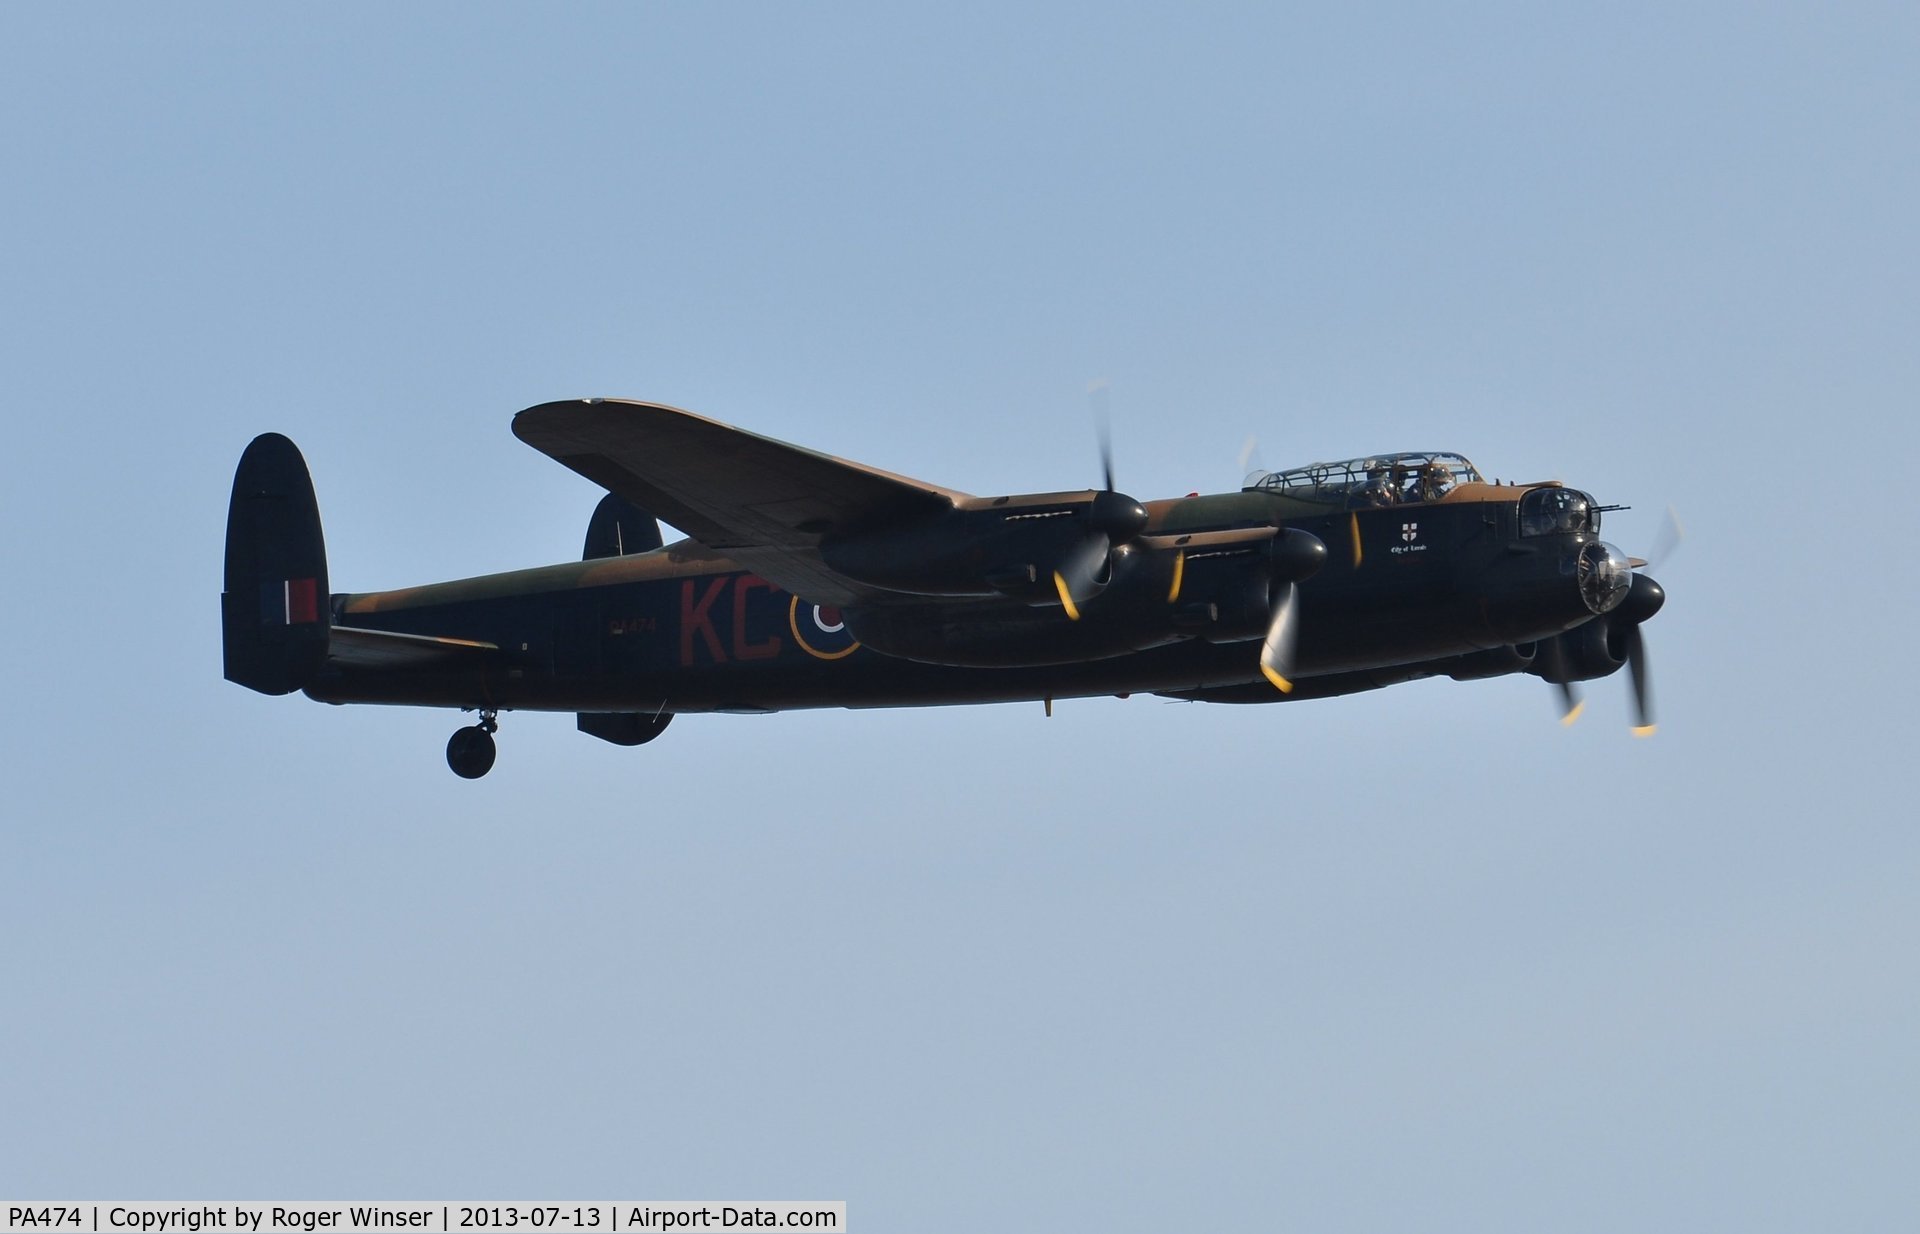 PA474, 1945 Avro 683 Lancaster B1 C/N VACH0052/D2973, Off airport. RAF BBMF Lancaster B.I 'Thumper III' coded KC-A displaying on the first day of the Wales National Air Show, Swansea Bay, UK.